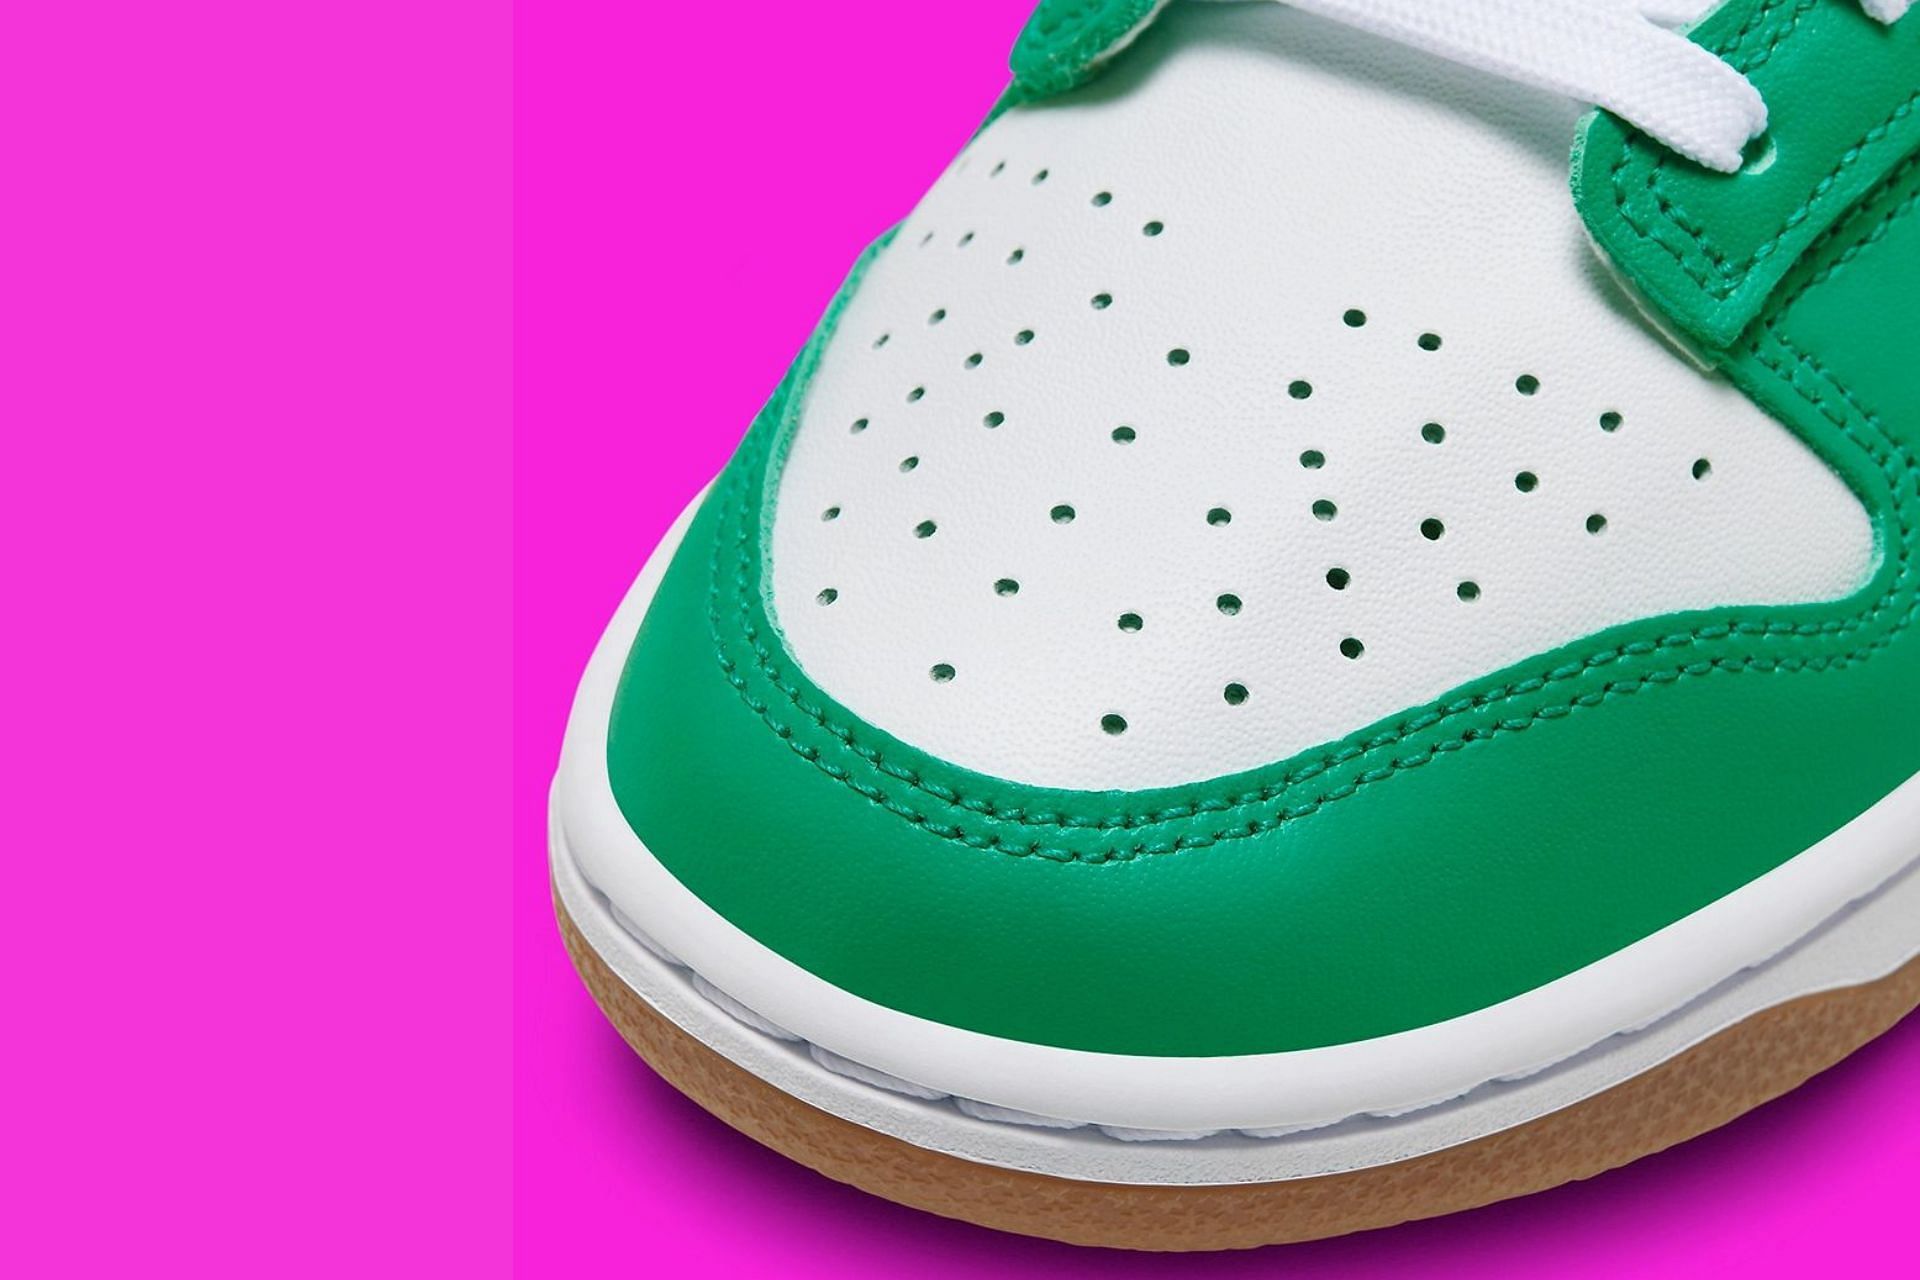 Take a closer look at the toe areas of these shoes (Image via Nike)